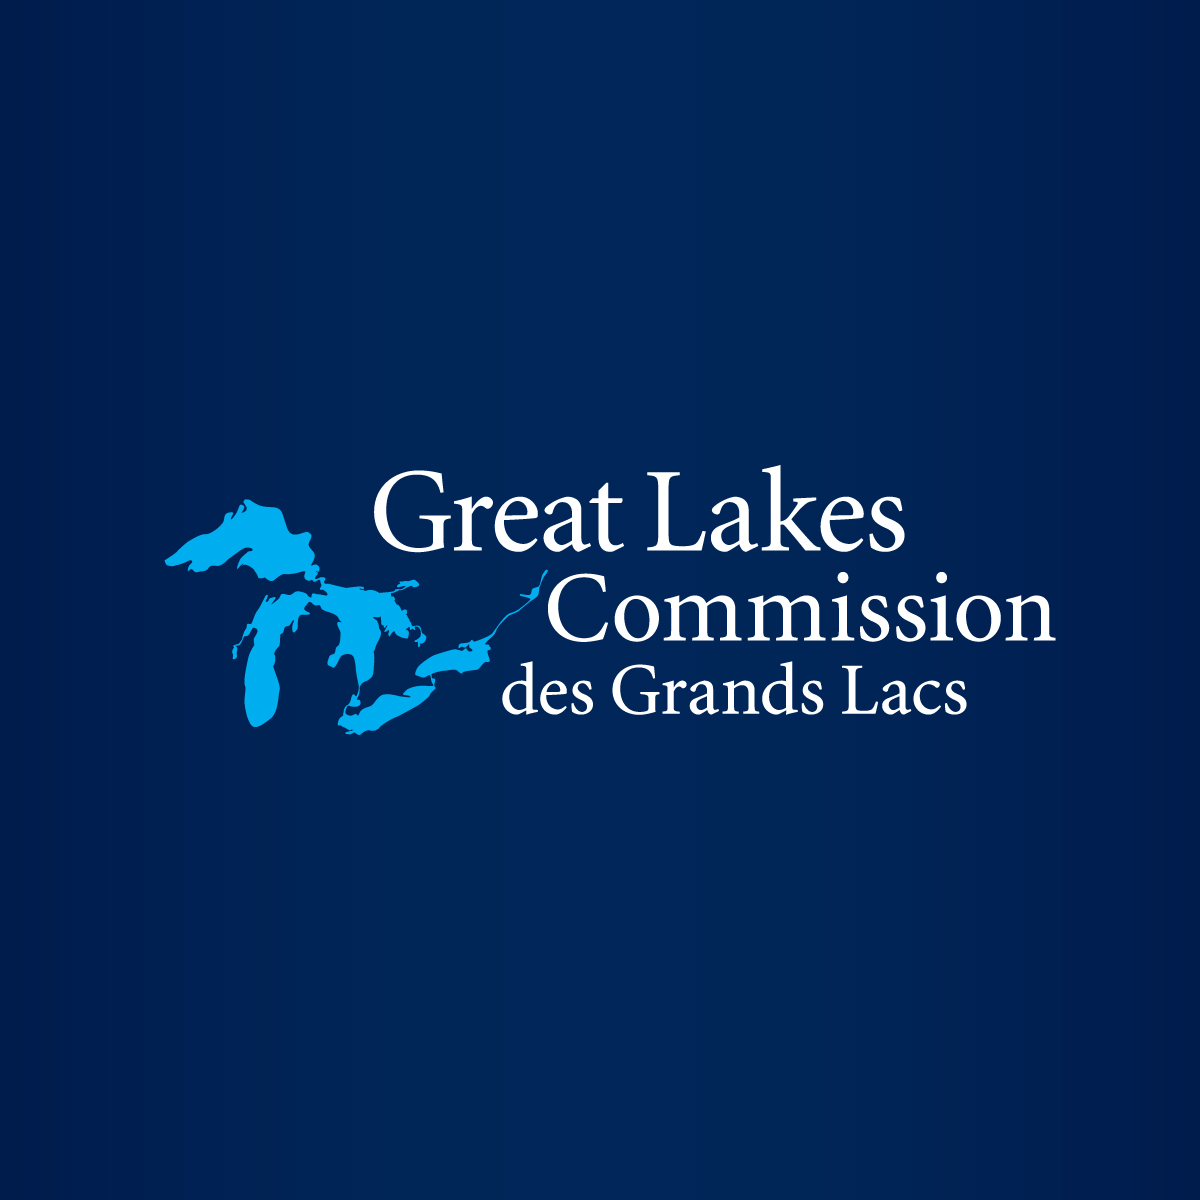 Great Lakes Commission releases new video highlighting habitat restoration at Powderhorn Lake near Chicago